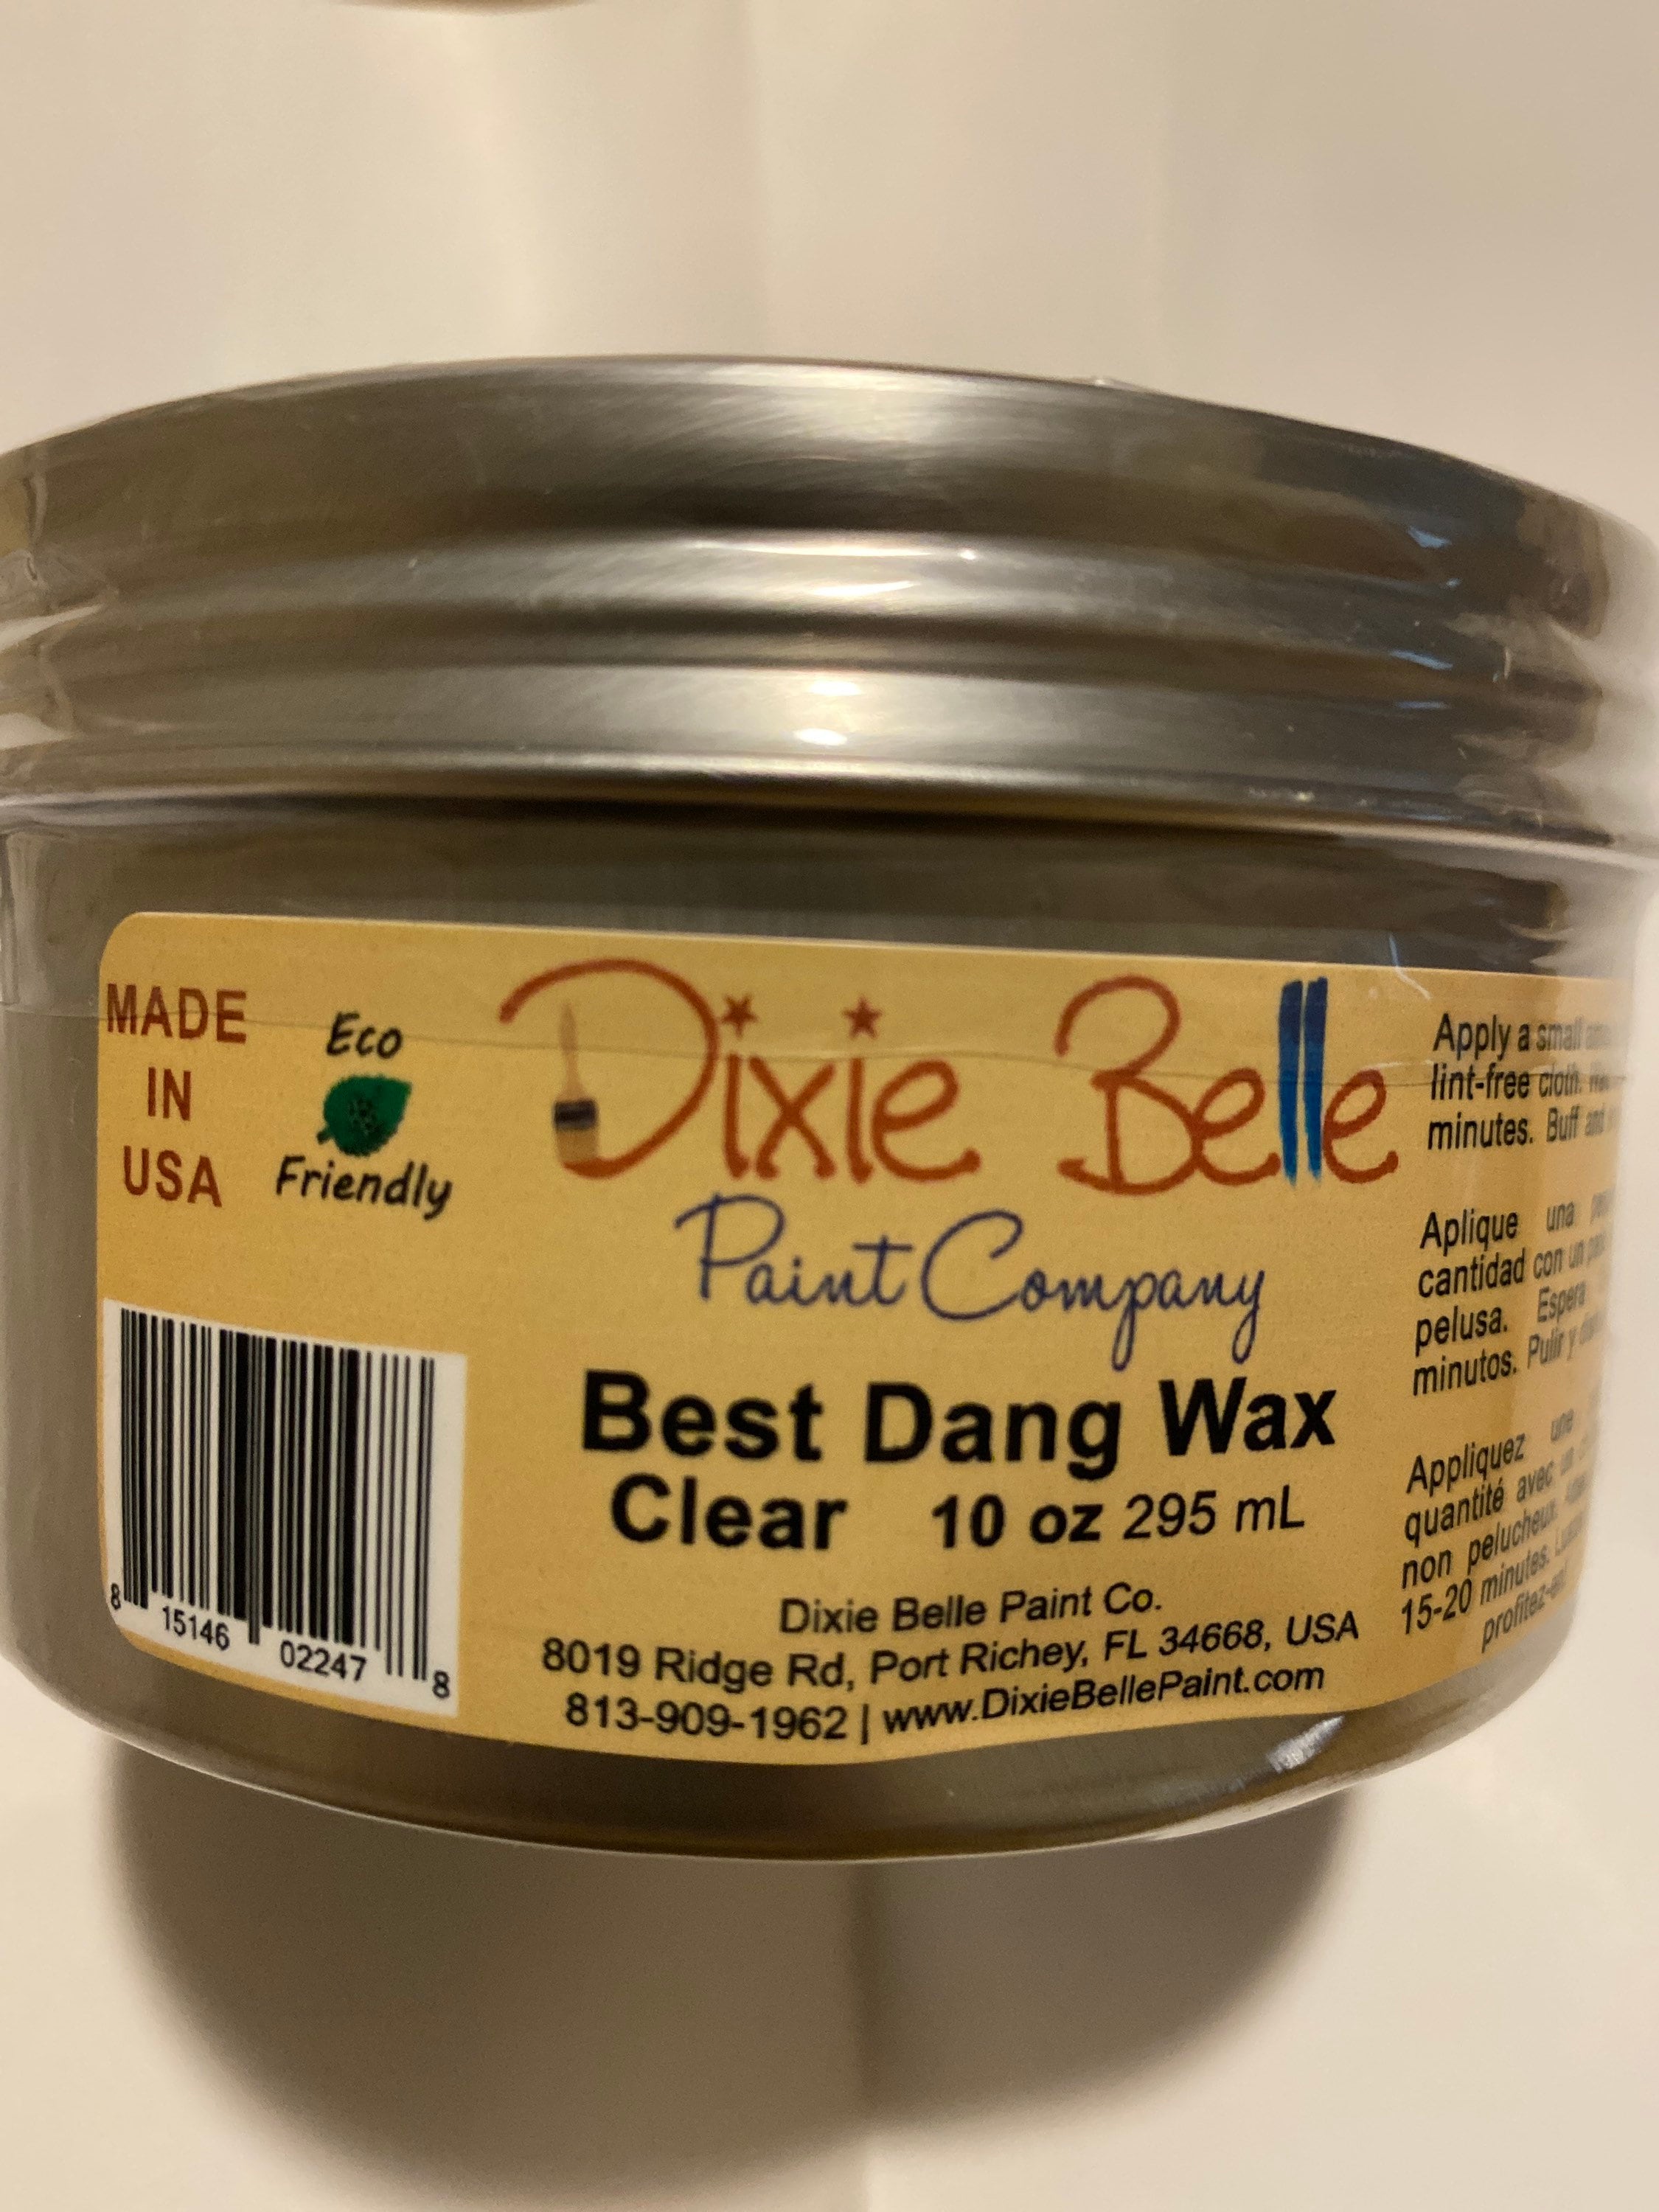 How to Use Best Dang Wax - Dixie Belle Paint Company